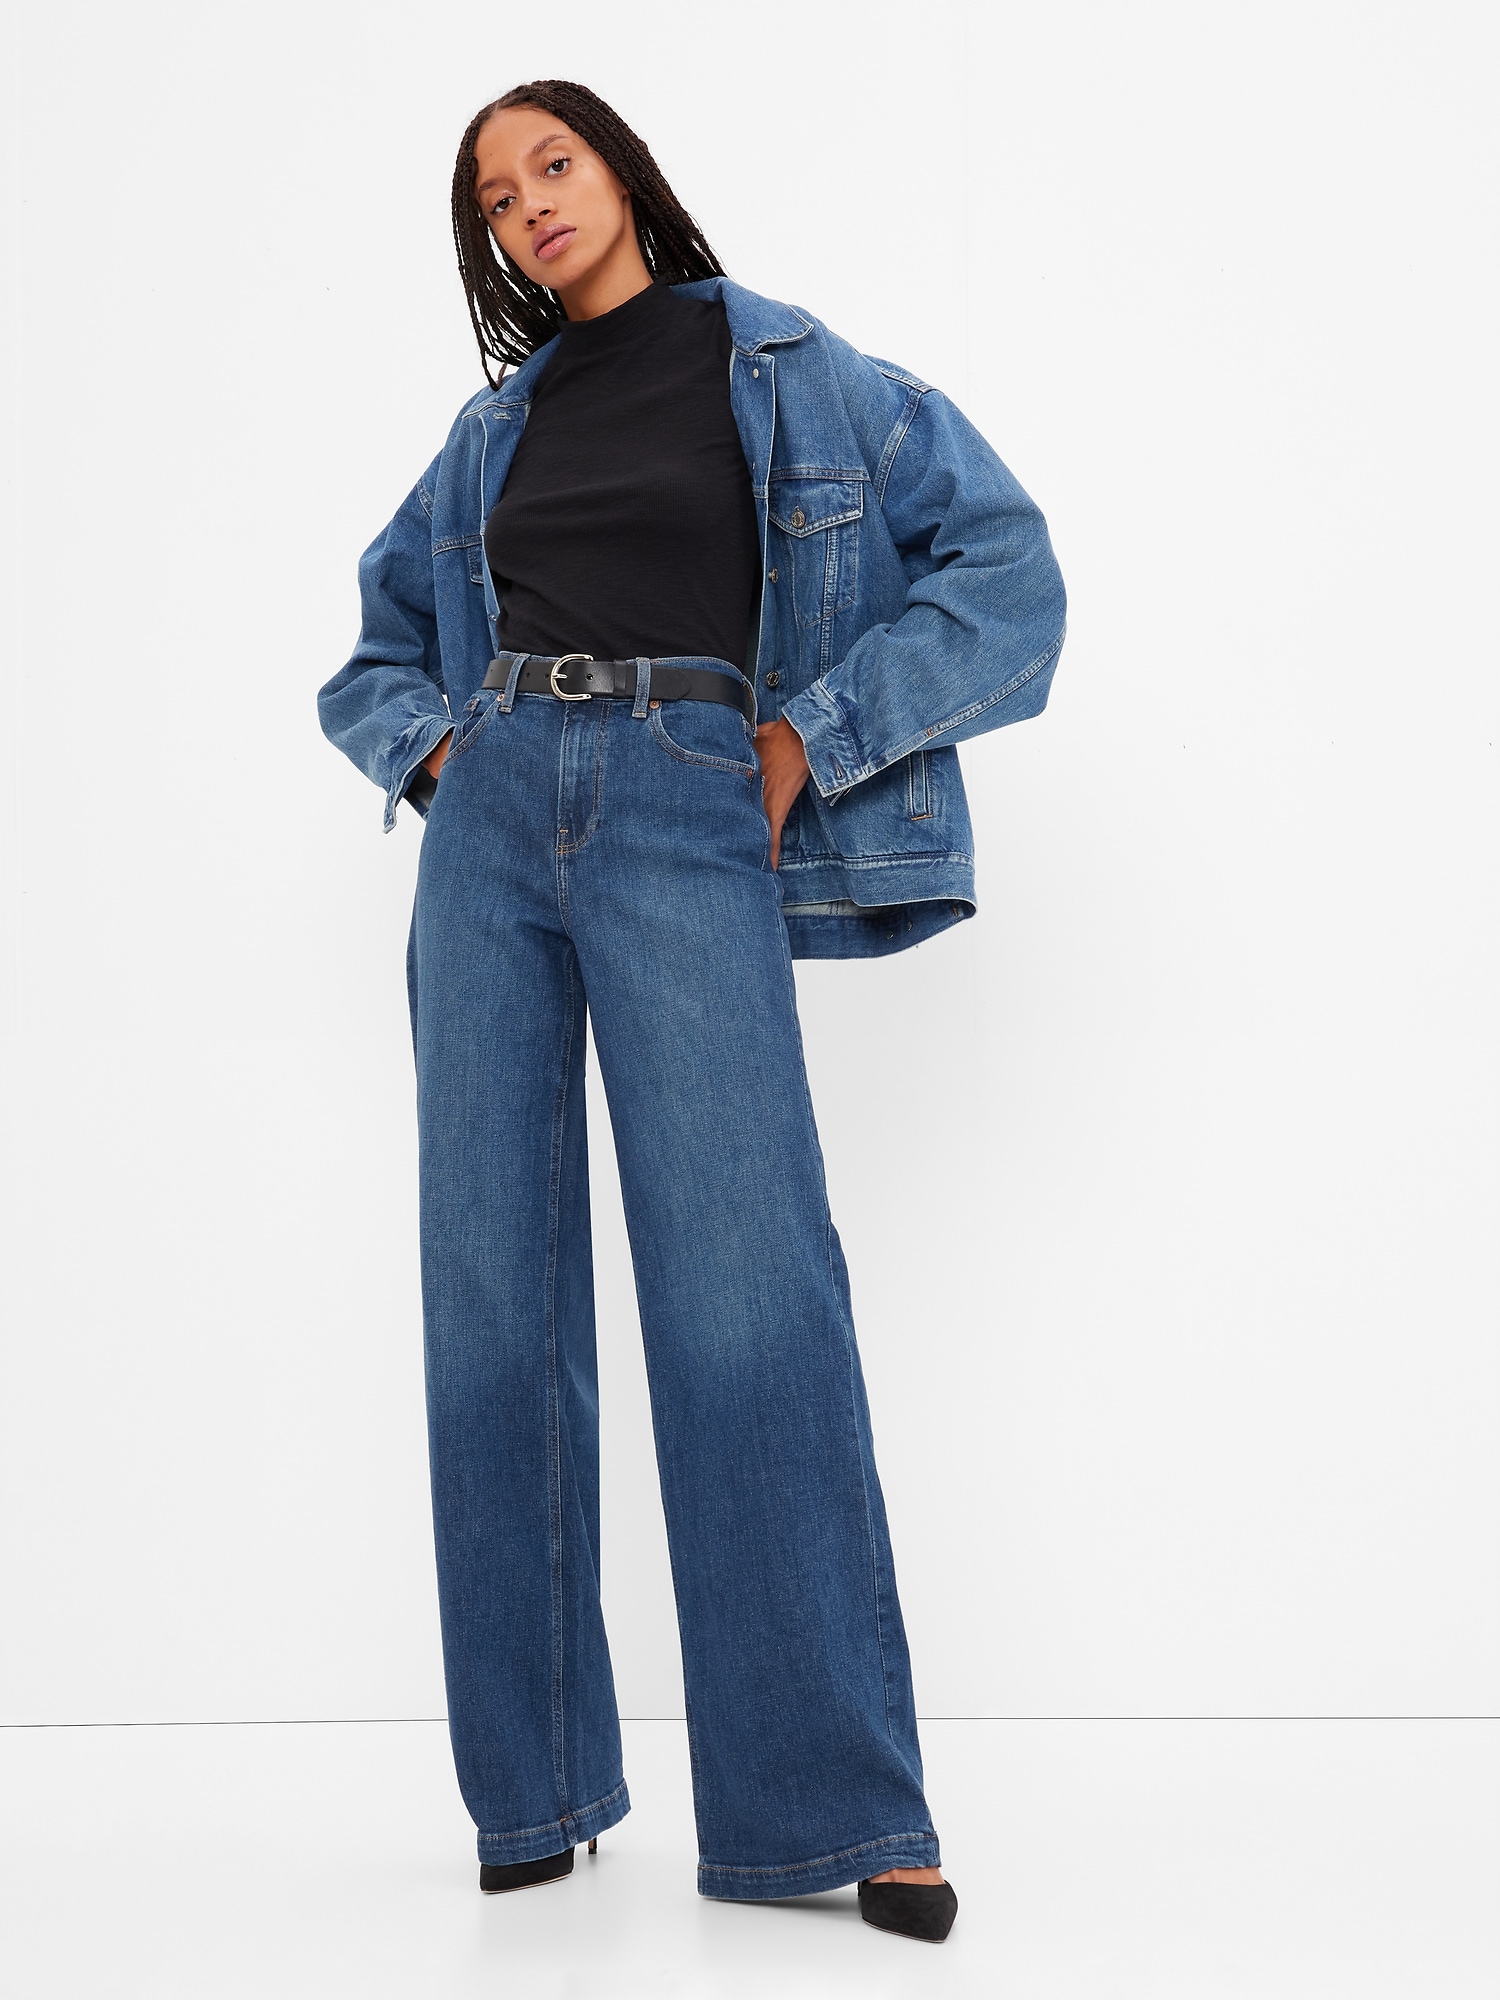 Gap 1981 flare jeans